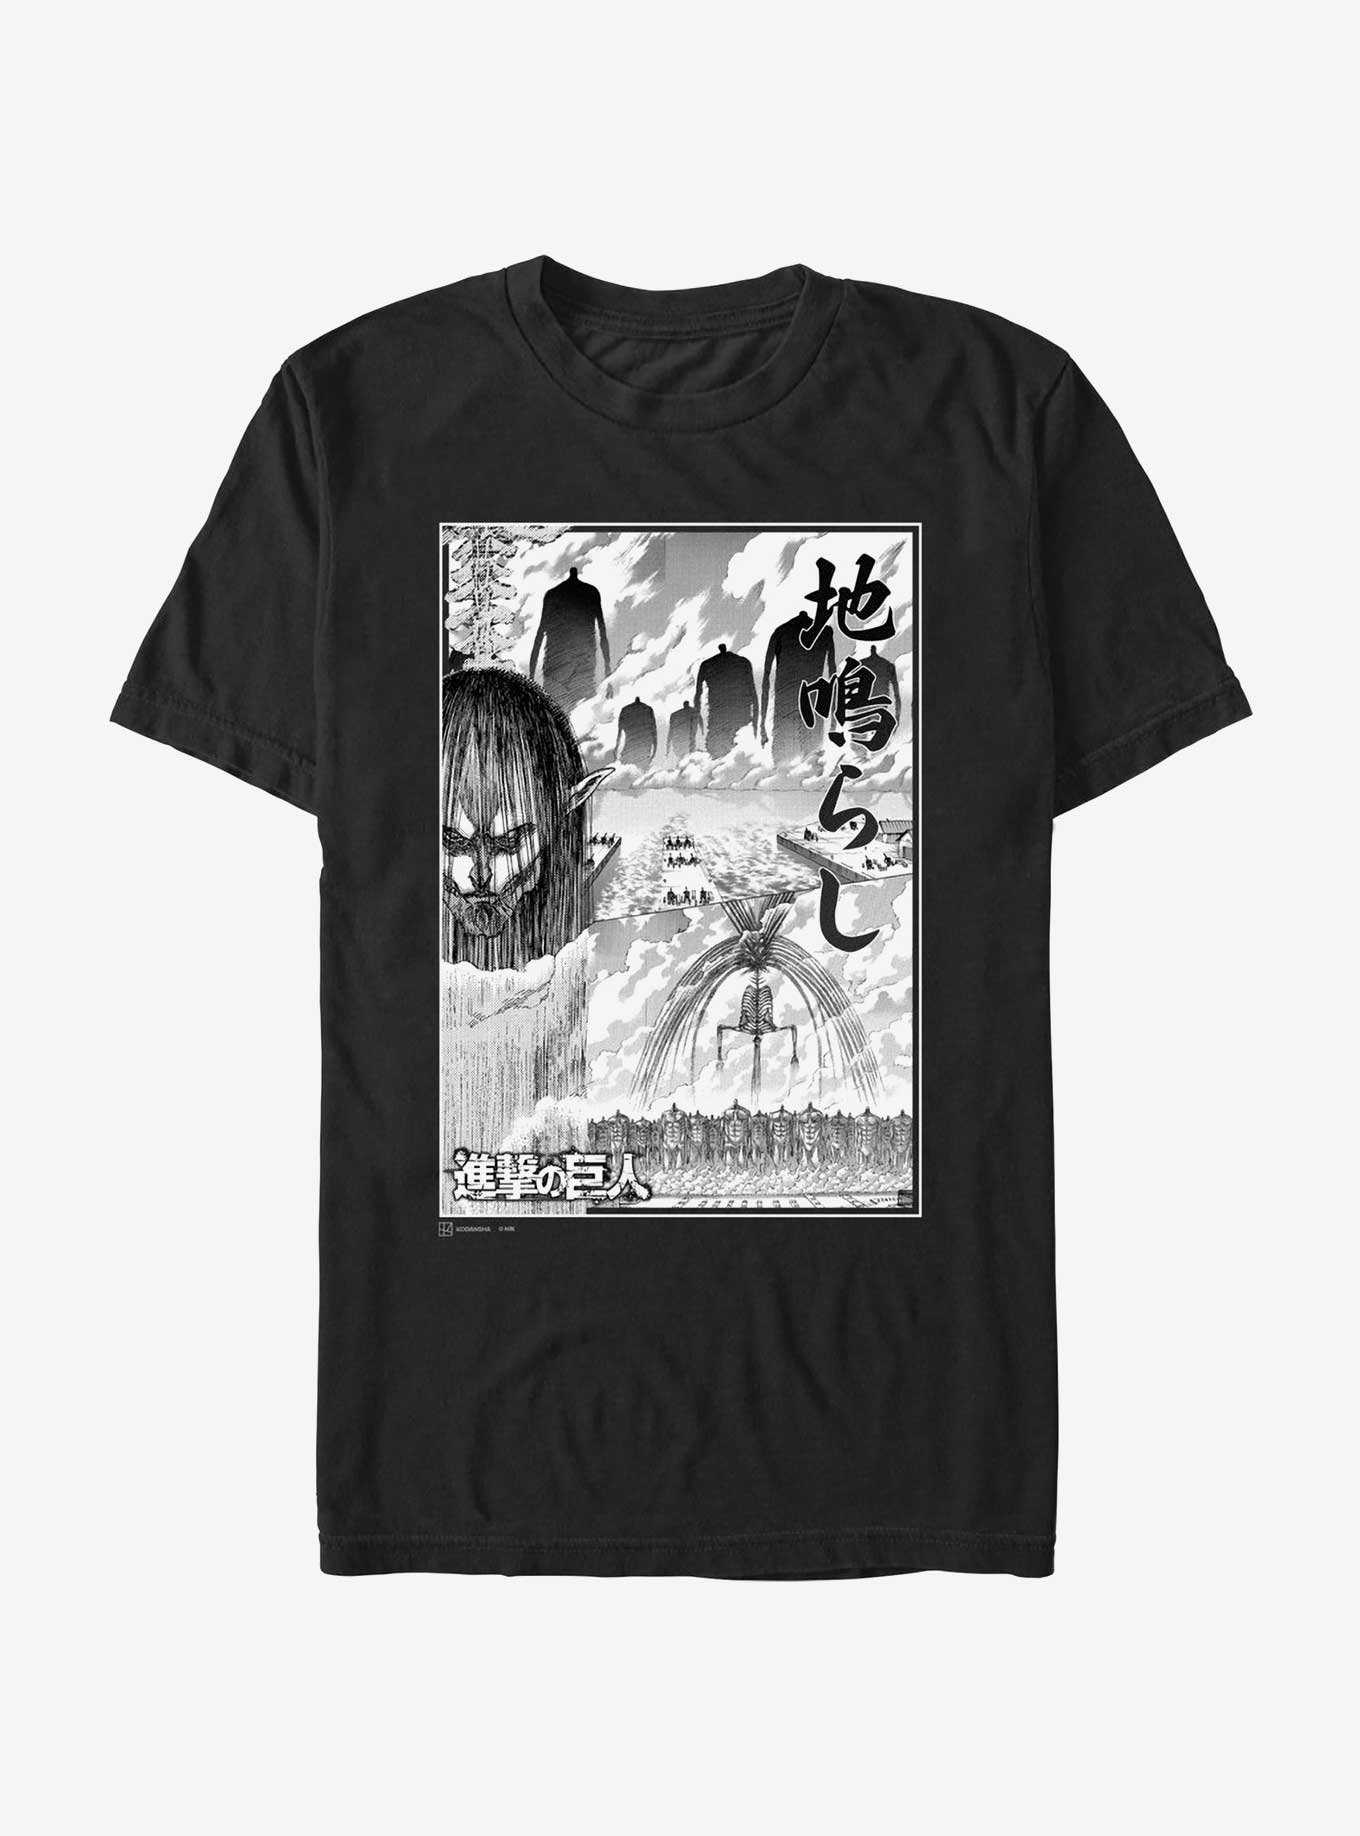 Attack On Titan The Rumbling Collage T-Shirt, , hi-res